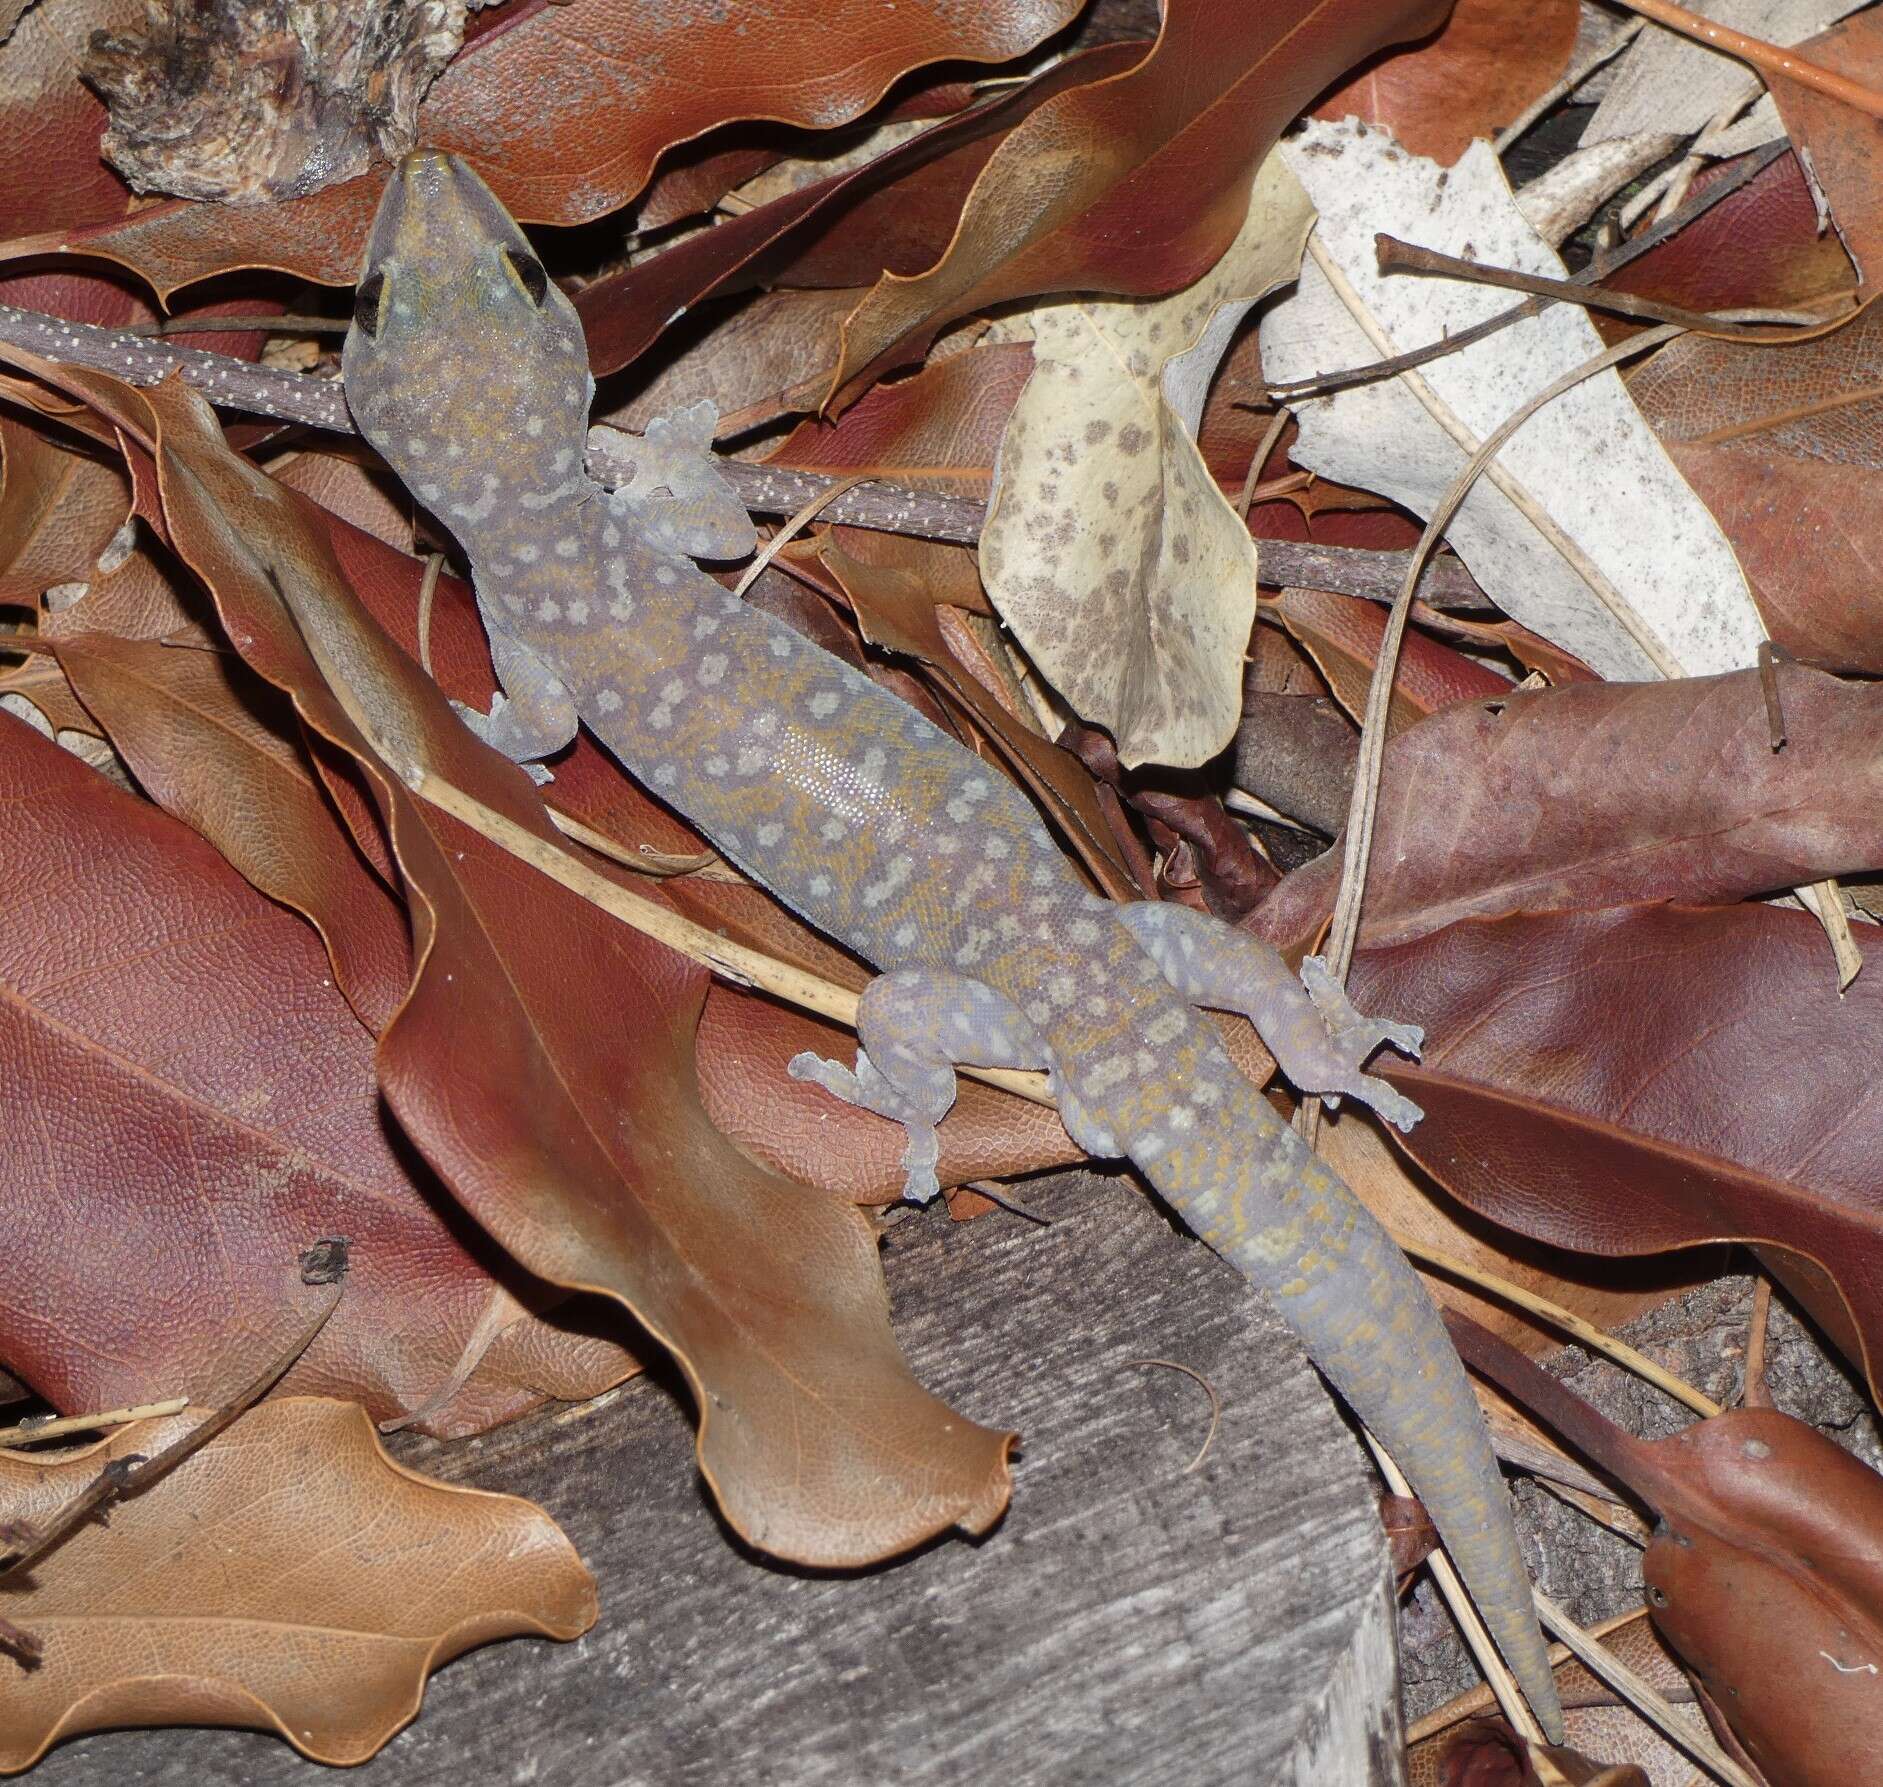 Image of Southern Spotted Velvet Gecko